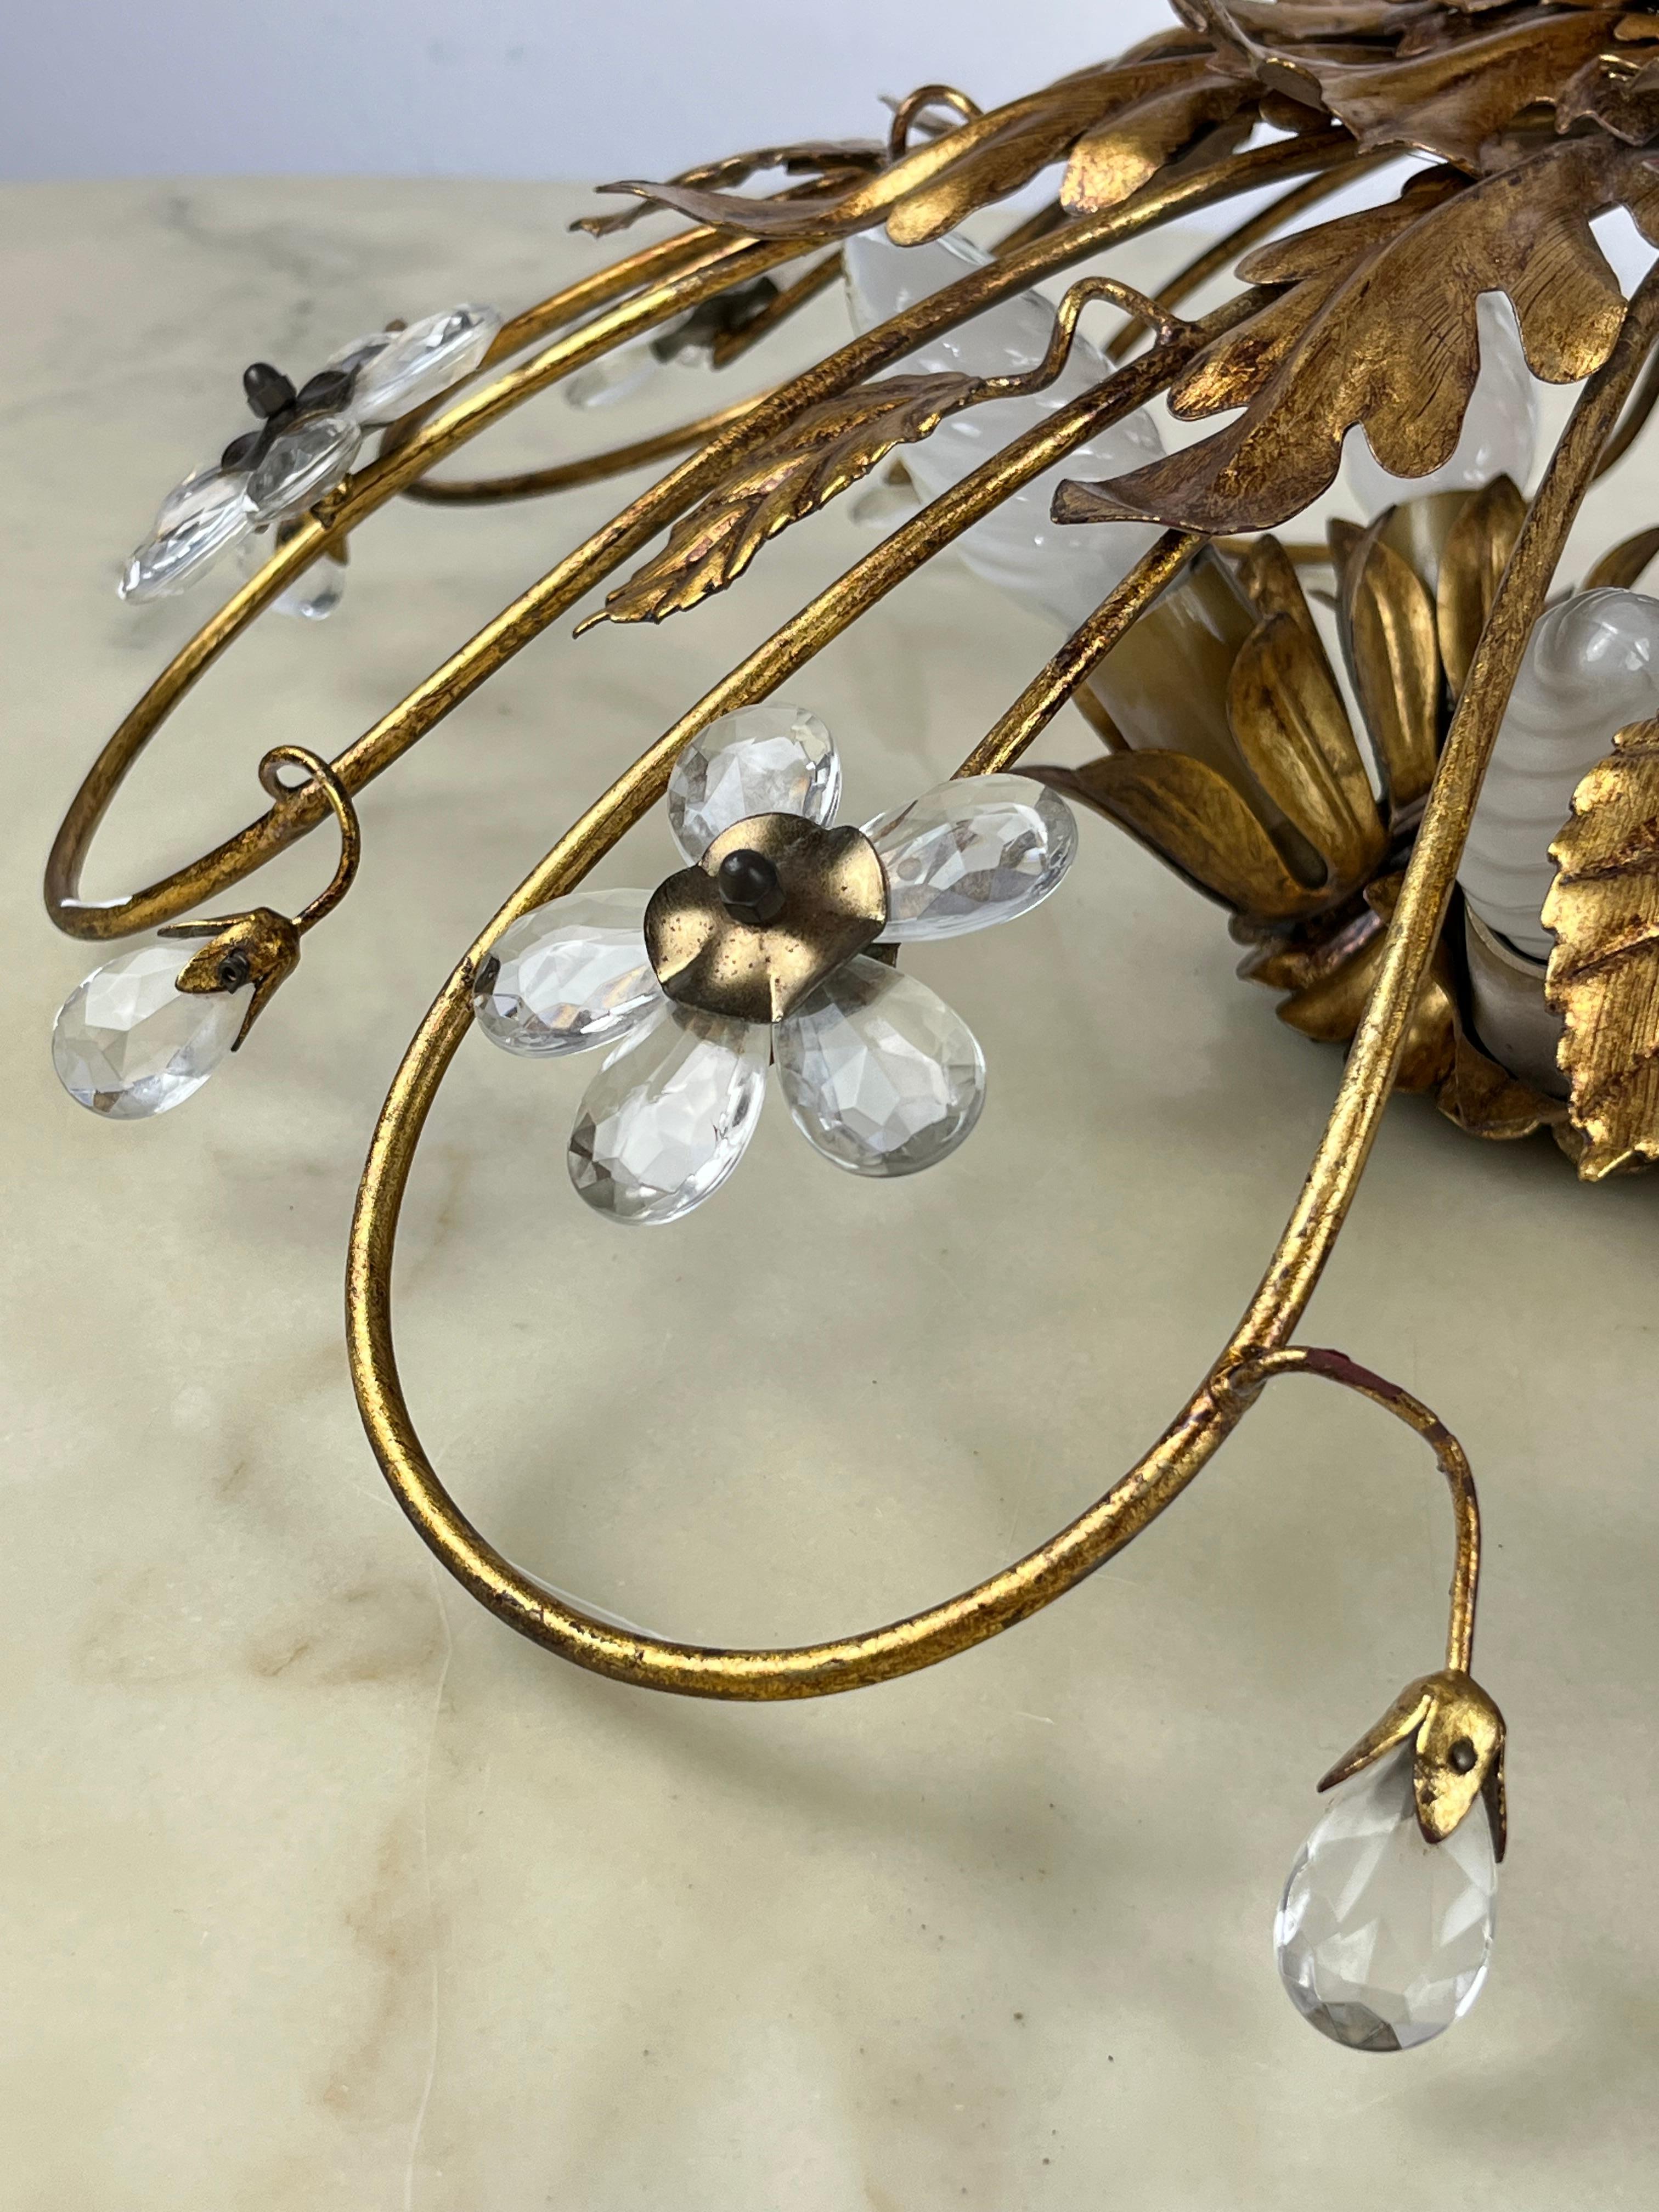 Banci ceiling light in gilded iron and crystal flowers, Italy, 1980s
Purchased in Florence, produced by the Banci company, it has 5 lights with E14 connection.
 It is perfectly intact and functional. Very good condition.